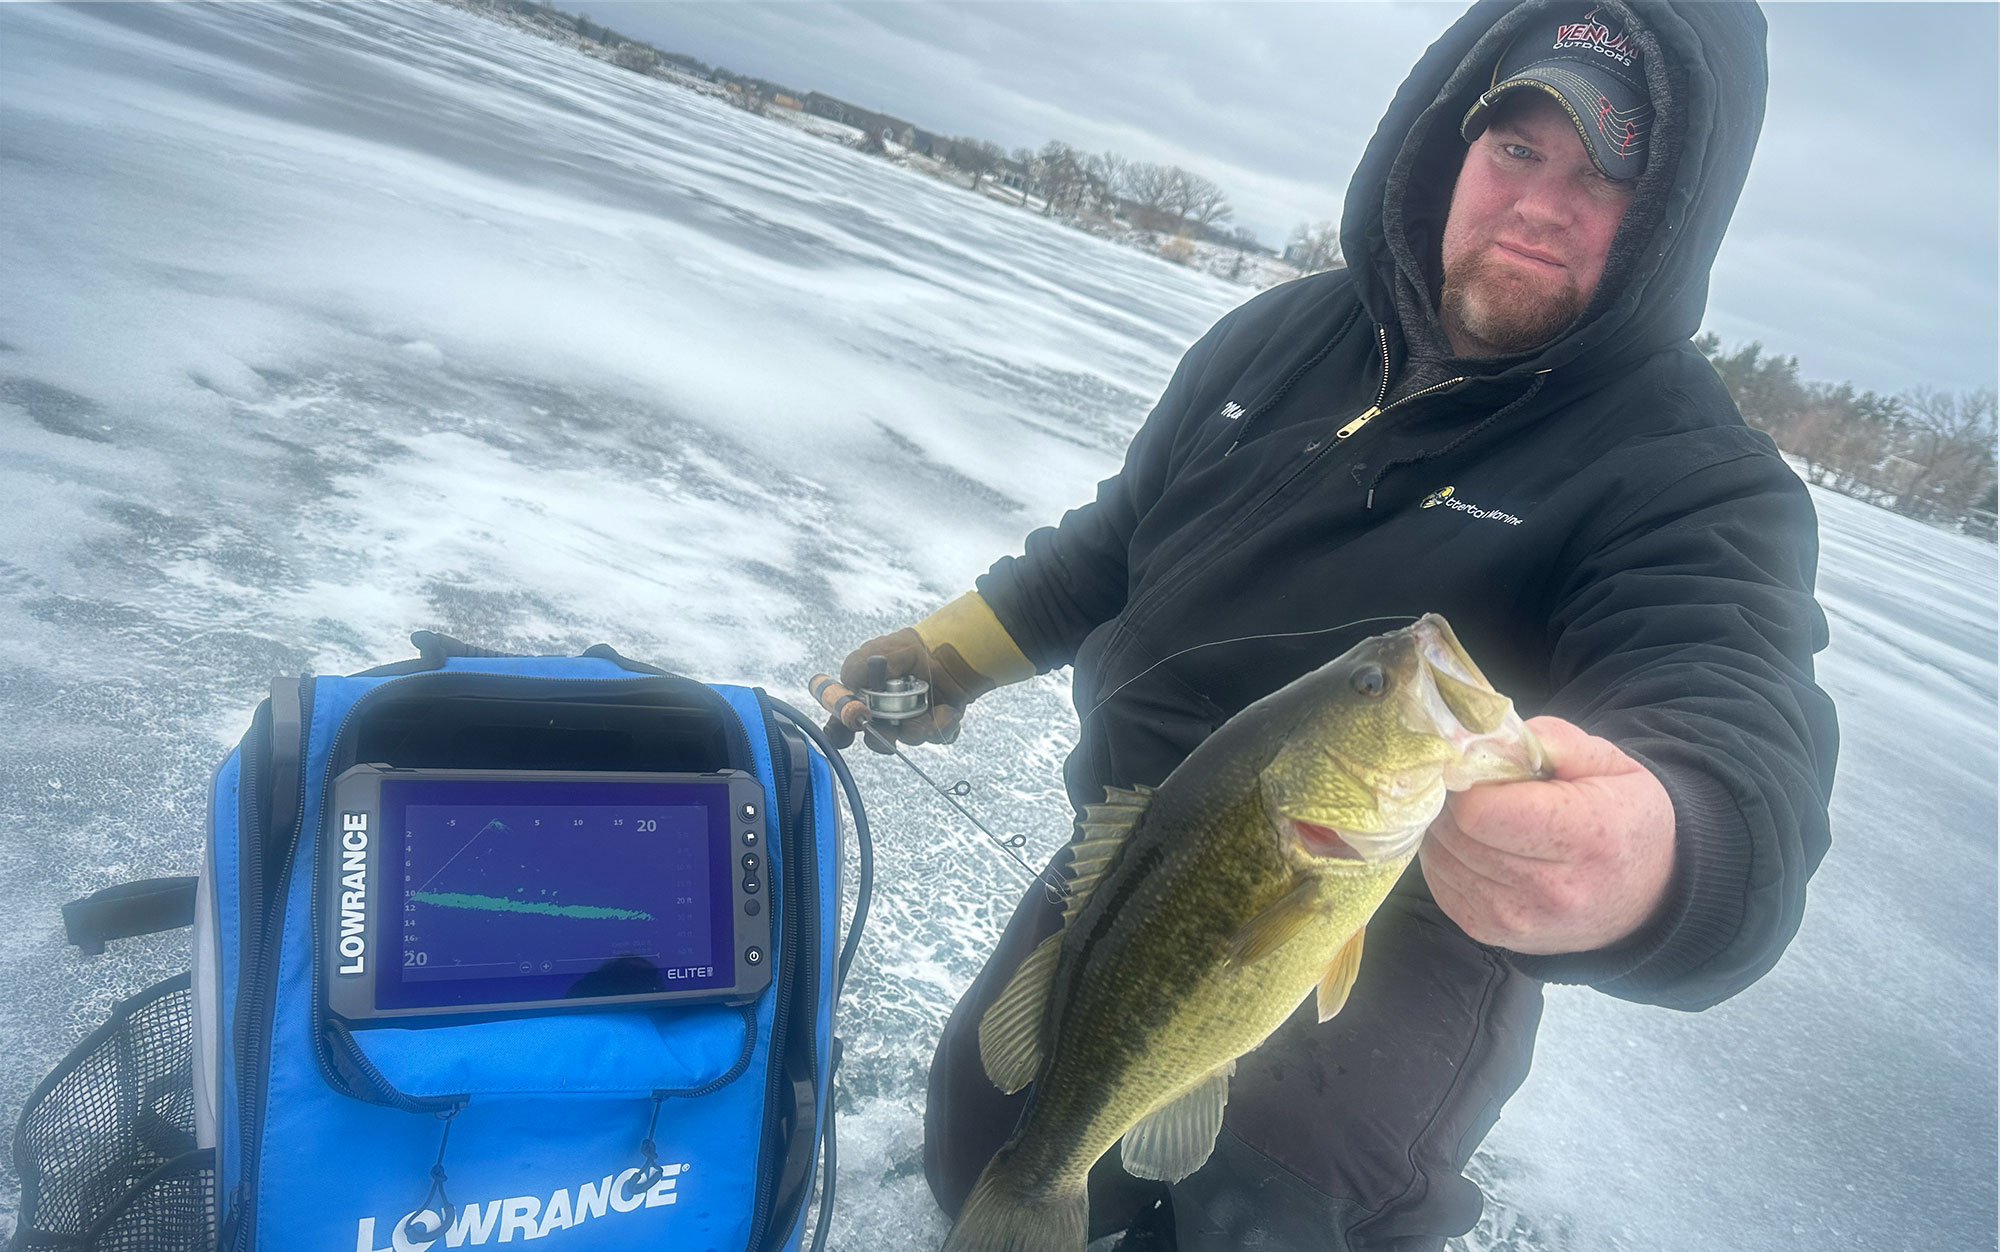 The key benefit of forward facing sonar for ice fishing. 🧊 #MEGALive